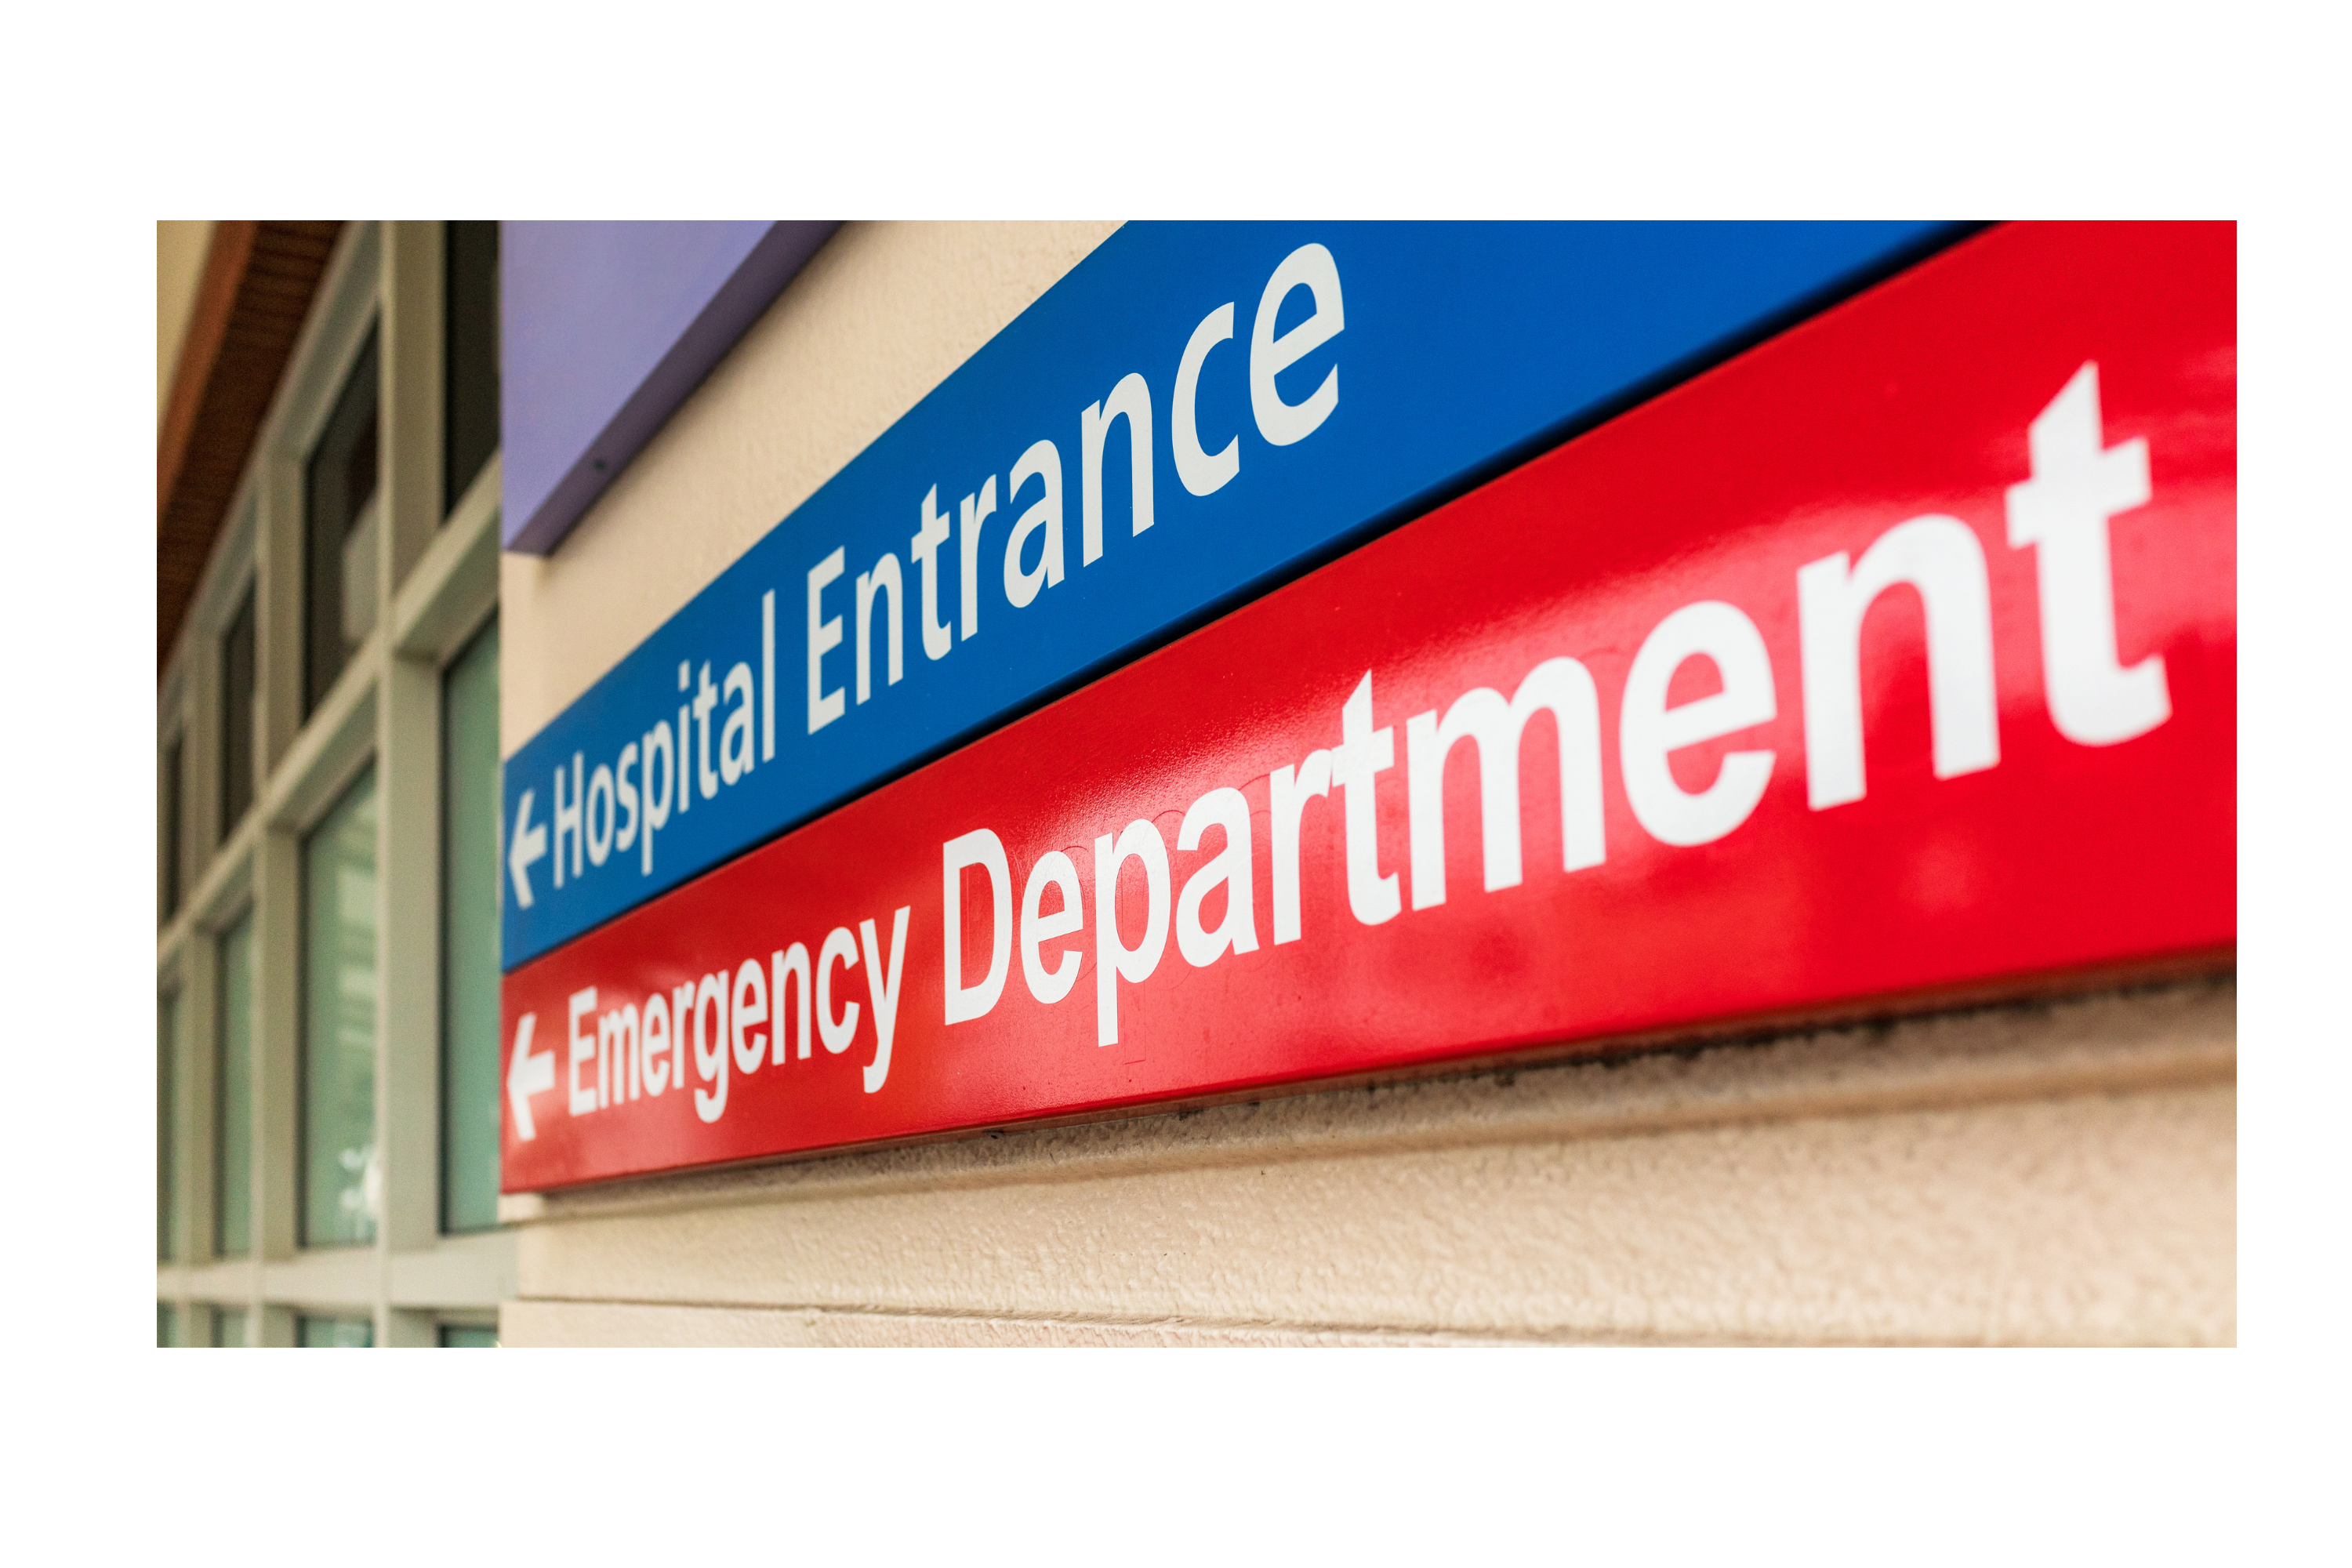 A sign with the words 'Hospital entrance' and underneath it the words 'Emergency department'. Both are pointing in the direction of left.